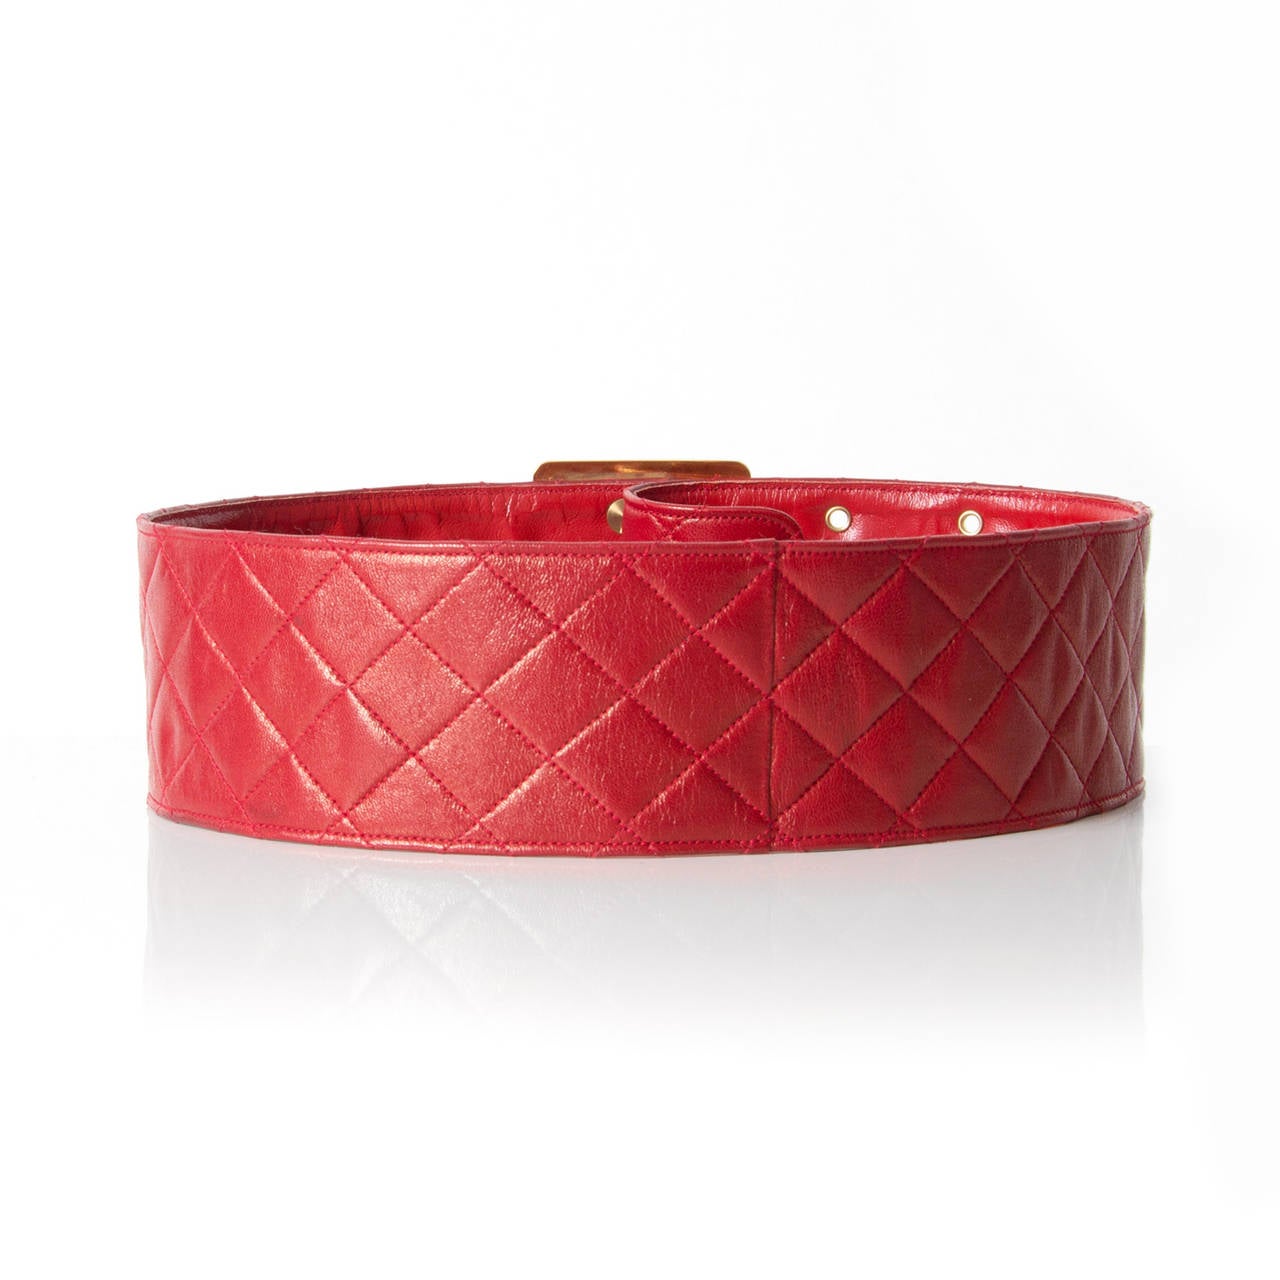 This Chanel wide buckled belt truly is a statement piece. The gold square buckle is decorated with the CC logo. The red lambskin with iconic quilted pattern is soft and supple.